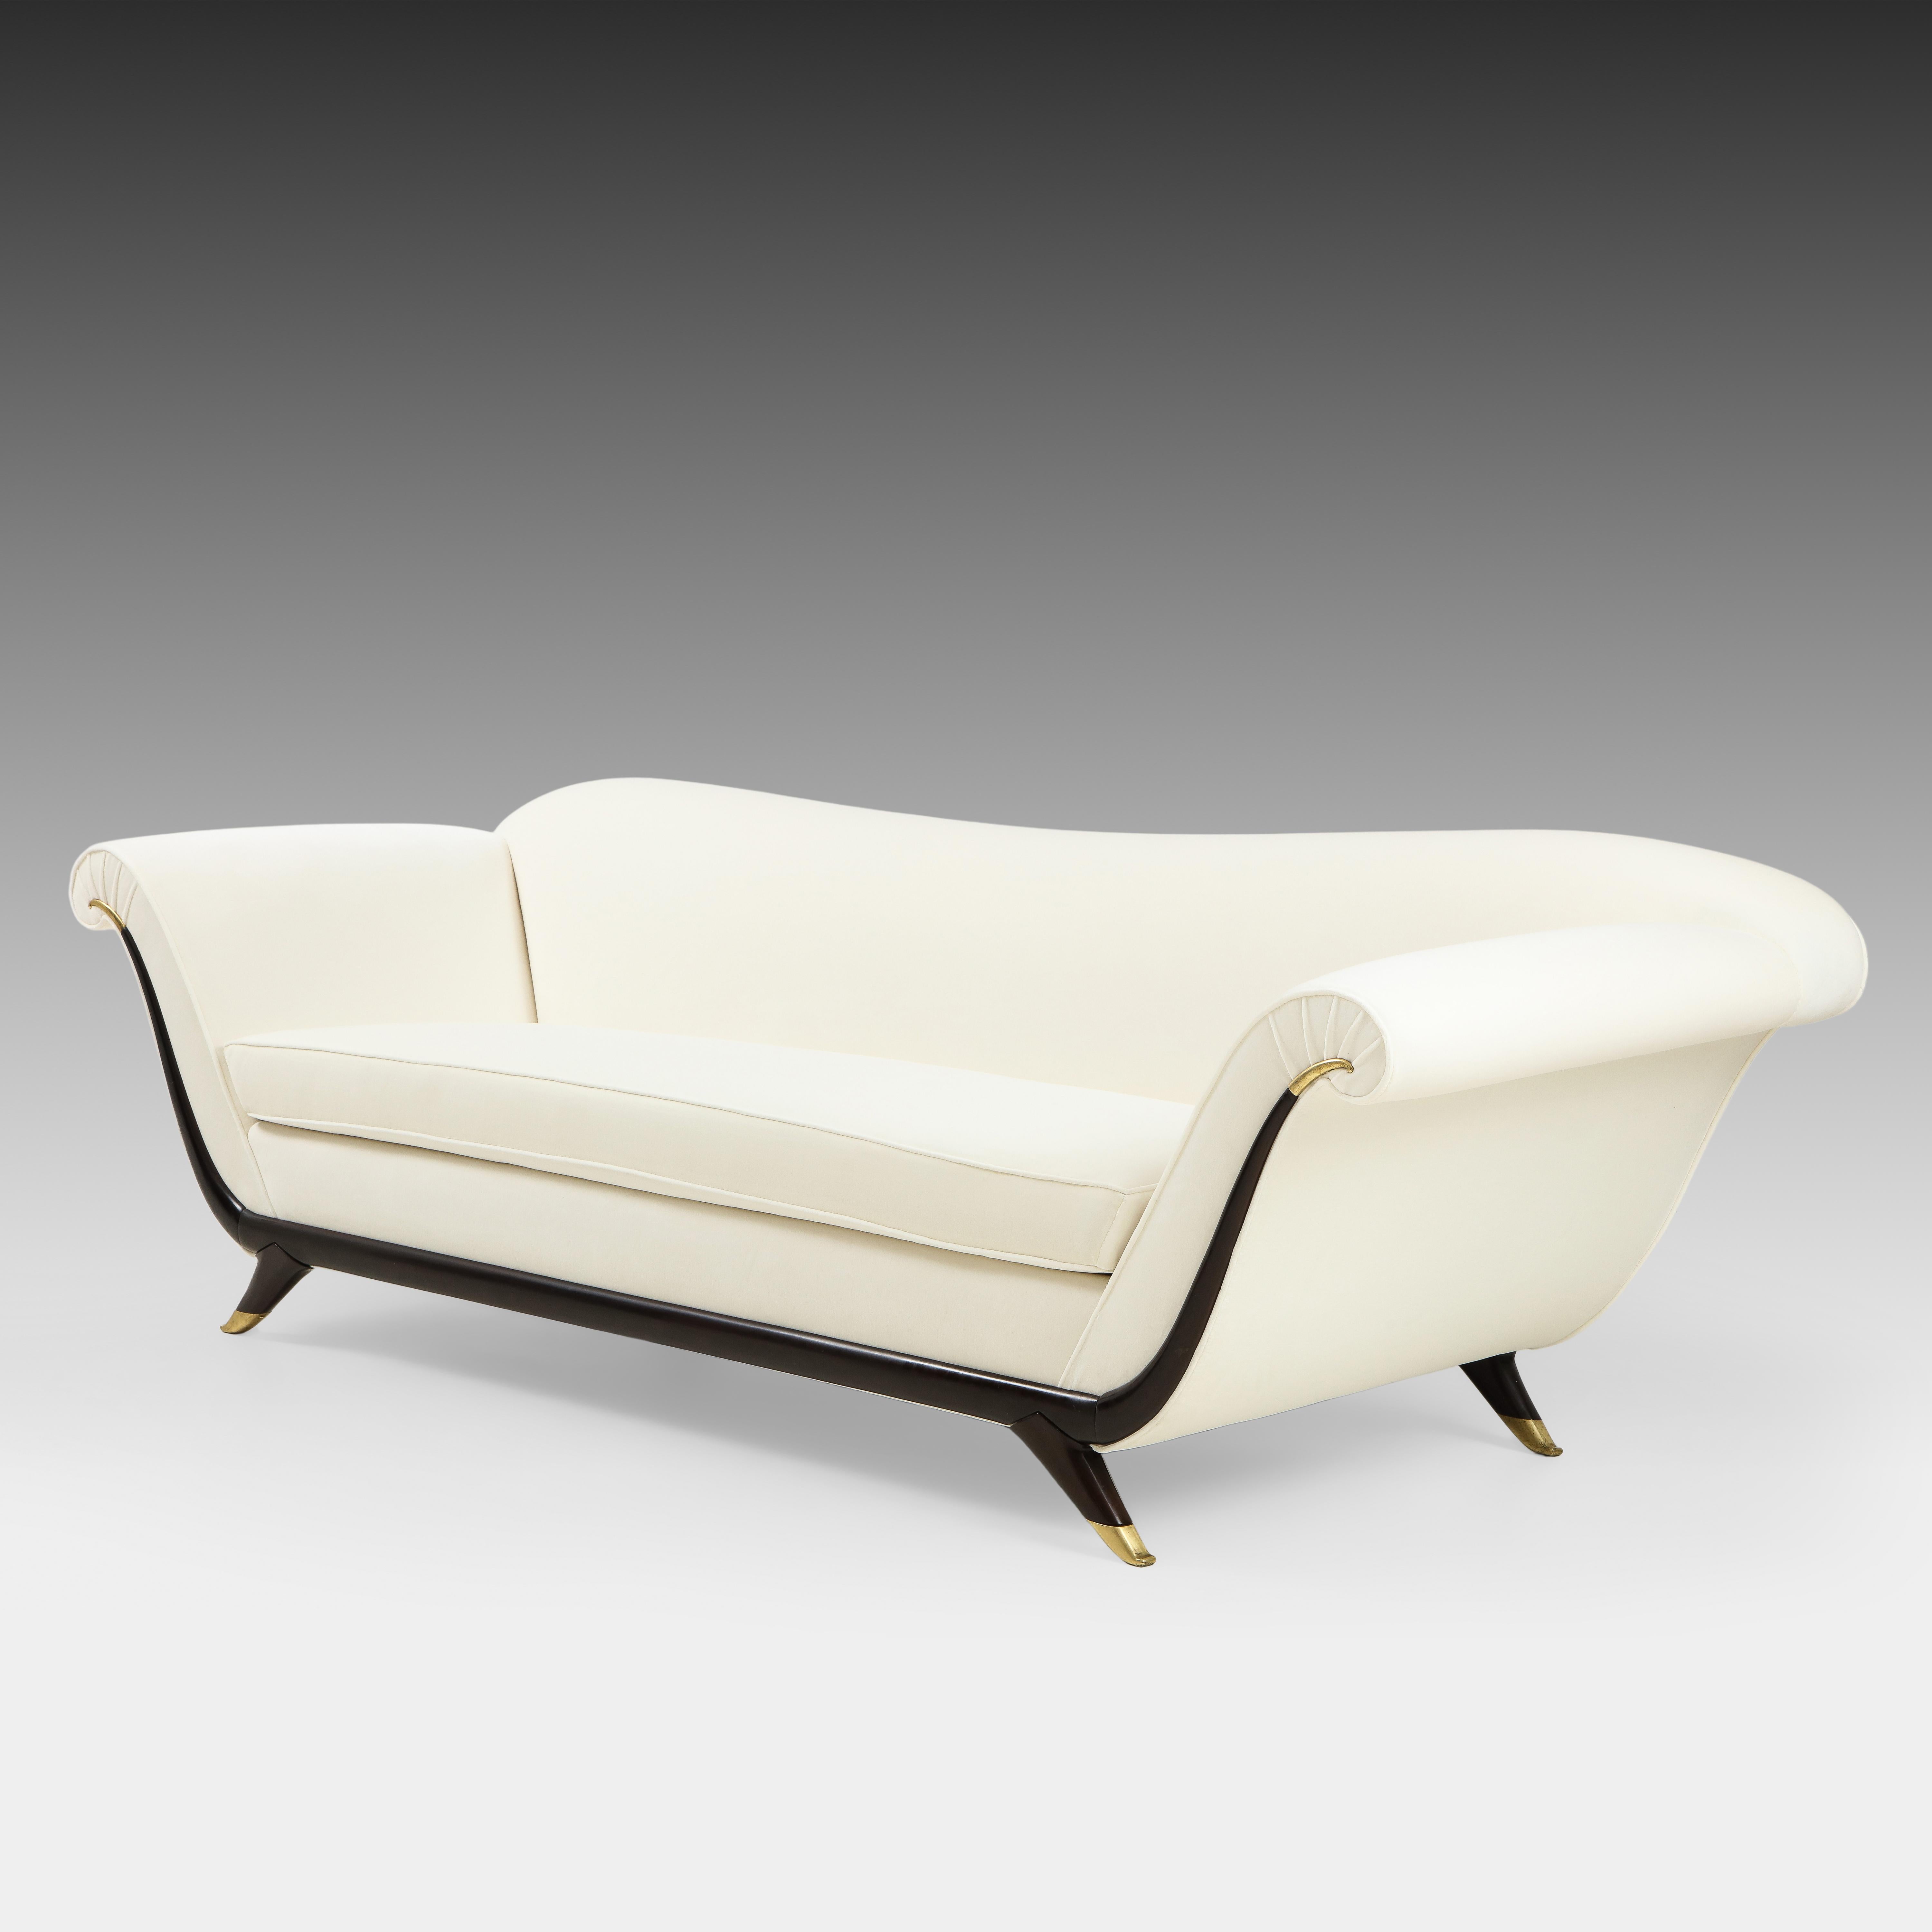 1940s Italian elegant and classic upholstered sofa with single seat cushion, lacquered wood and brass details, and splayed legs ending in brass sabots attributed to Guglielmo Ulrich. This exquisite gondola-shaped sofa is contoured with sweeping